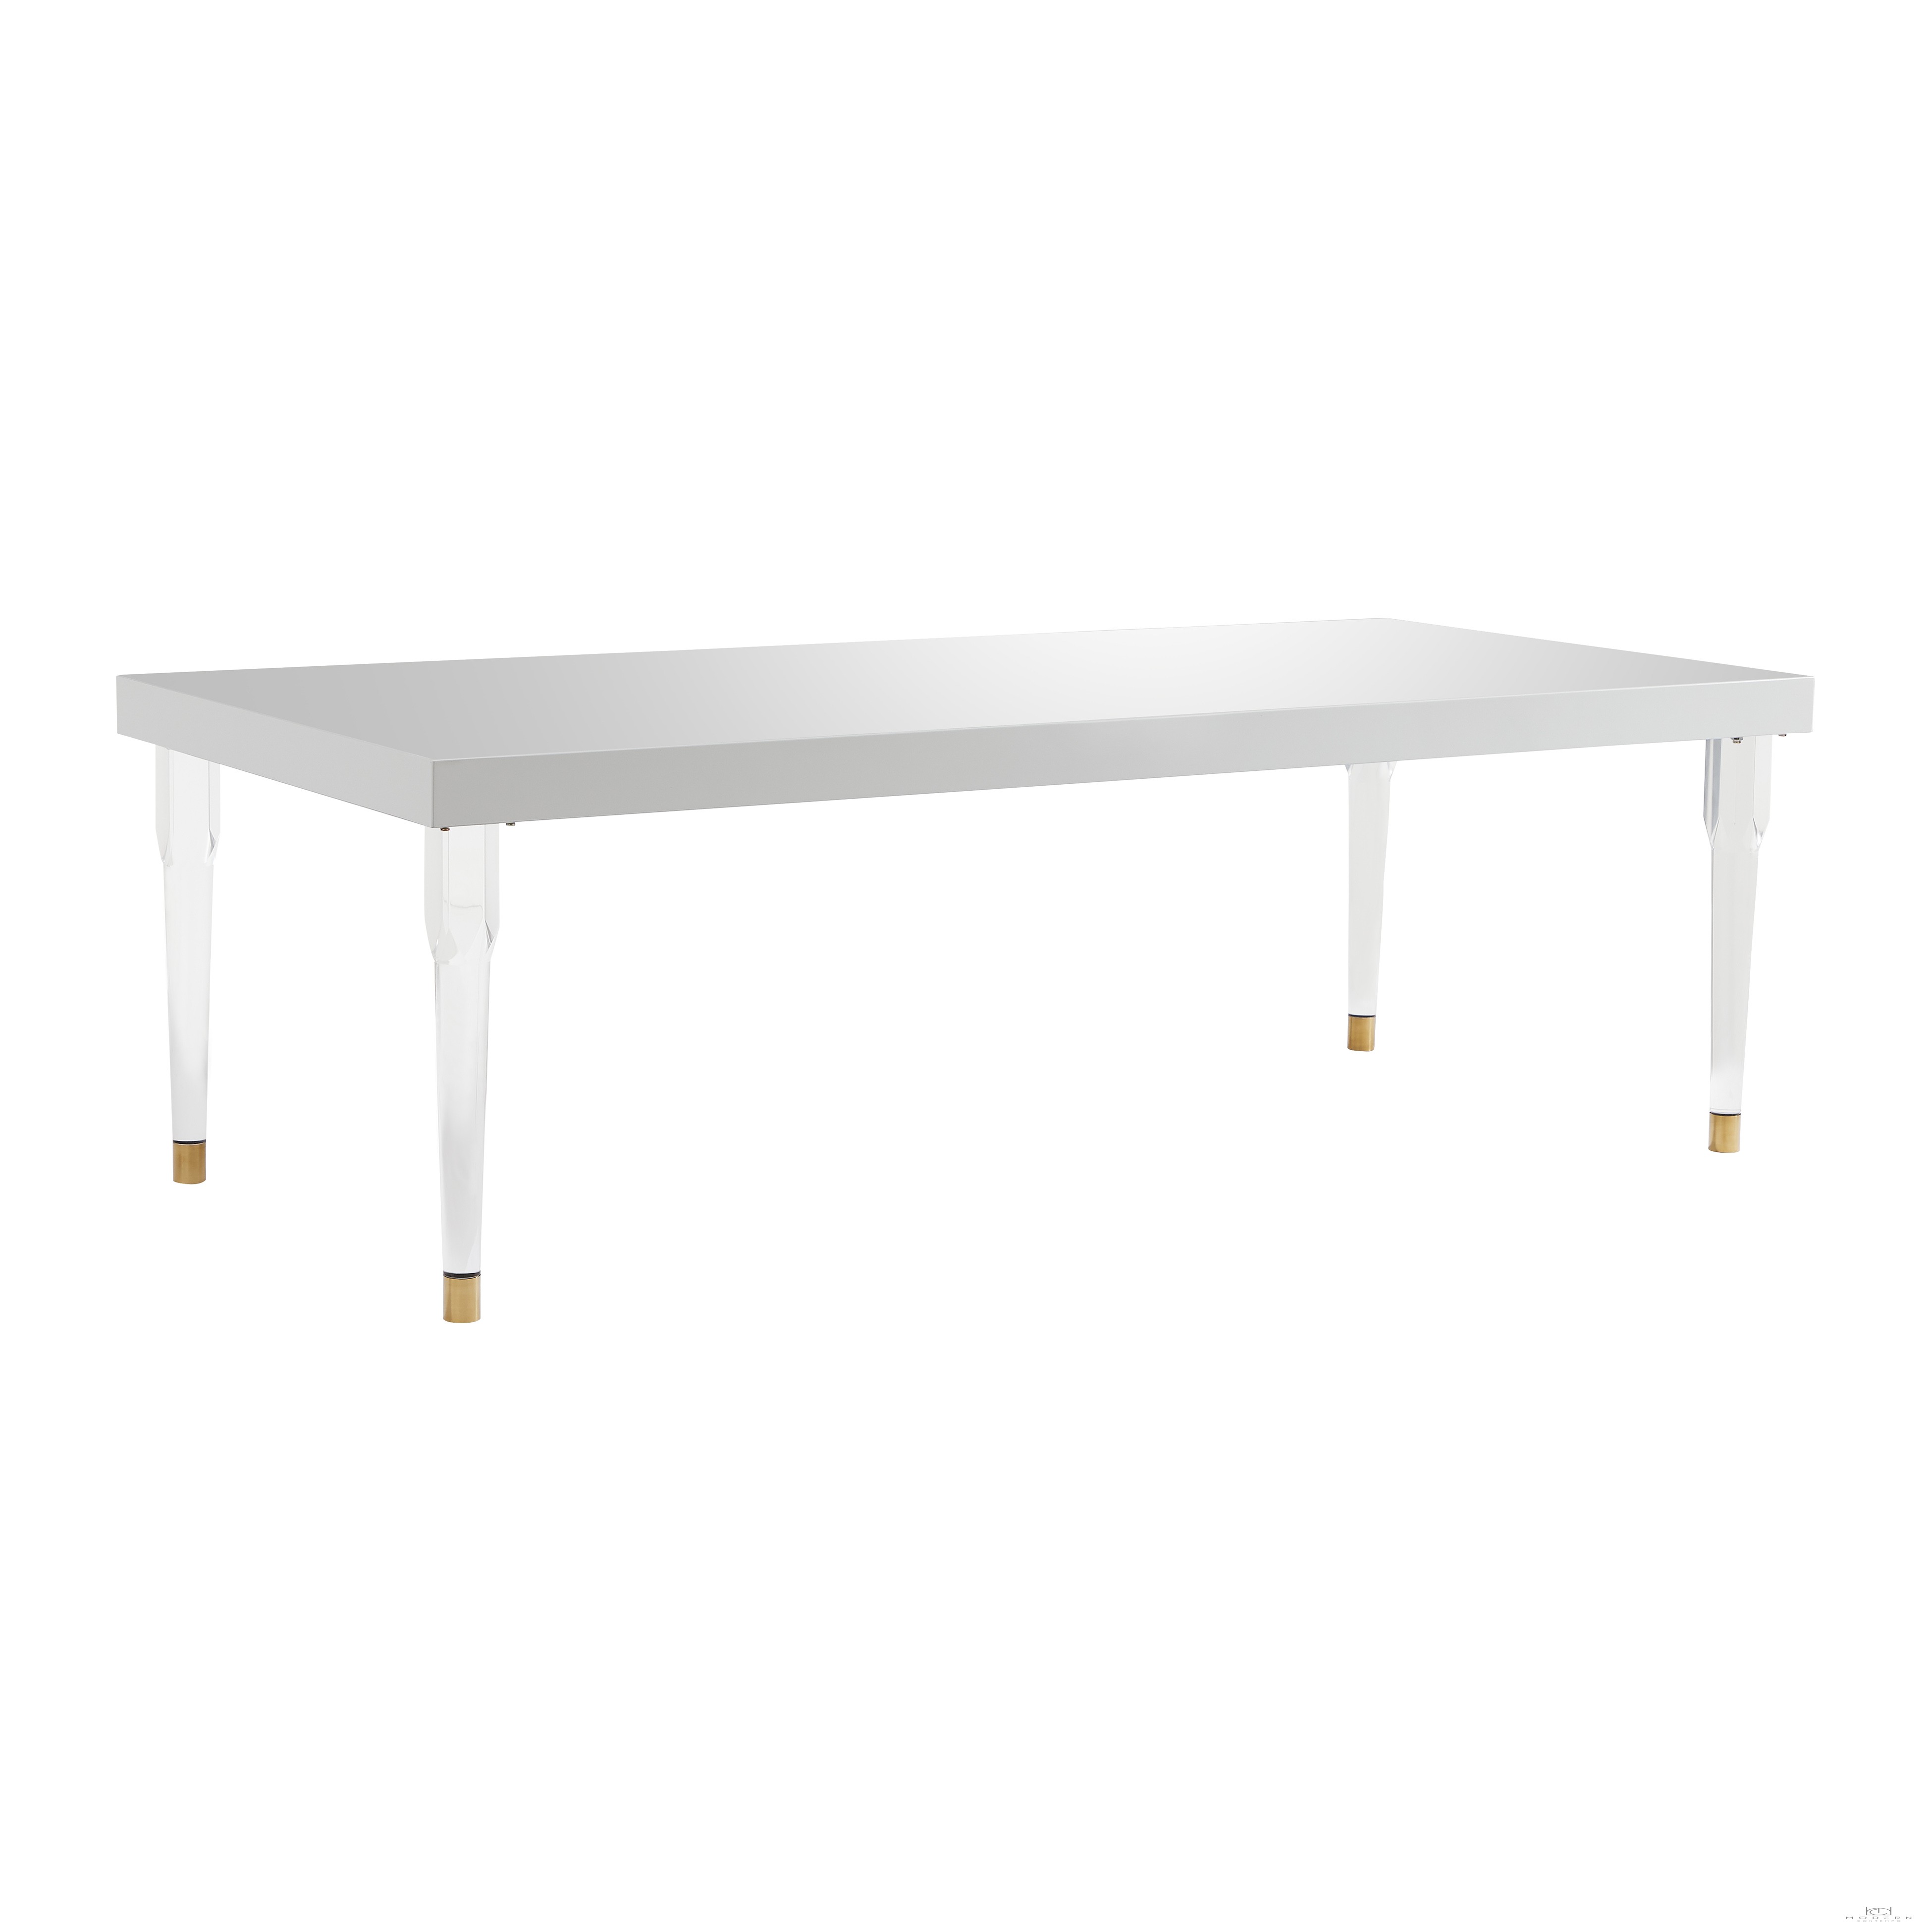 94.5" Explosion GLOSSY LACQUER DINING TABLE